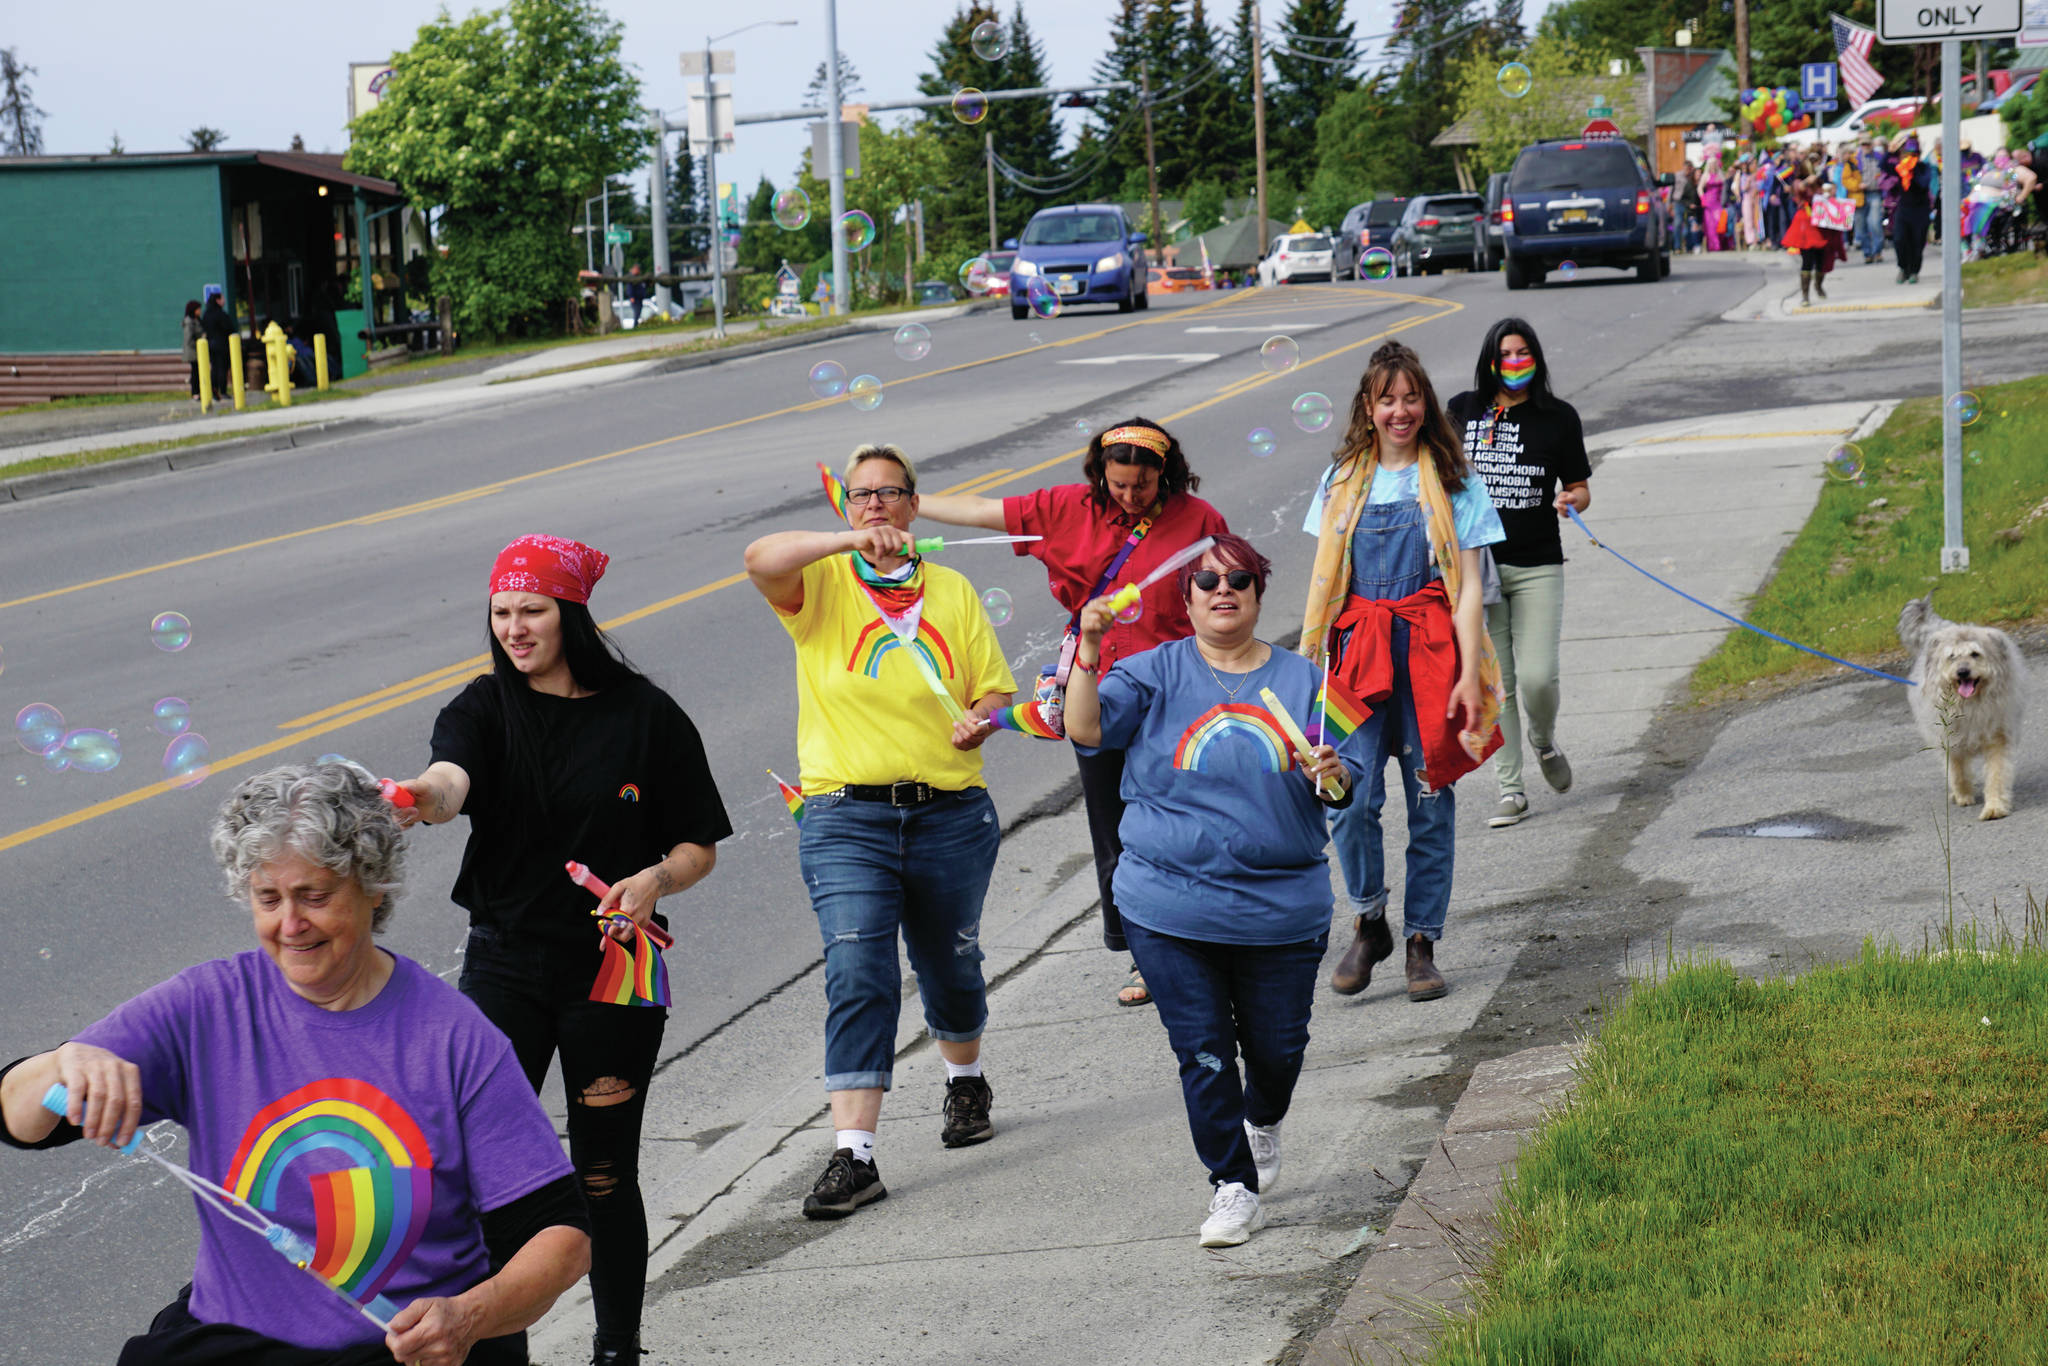 People march in a combined Pride and Juneteenth event on Saturday, June 19, 2021, along Pioneer Avenue in Homer, Alaska. (Photo by Michael Armstrong/Homer News)